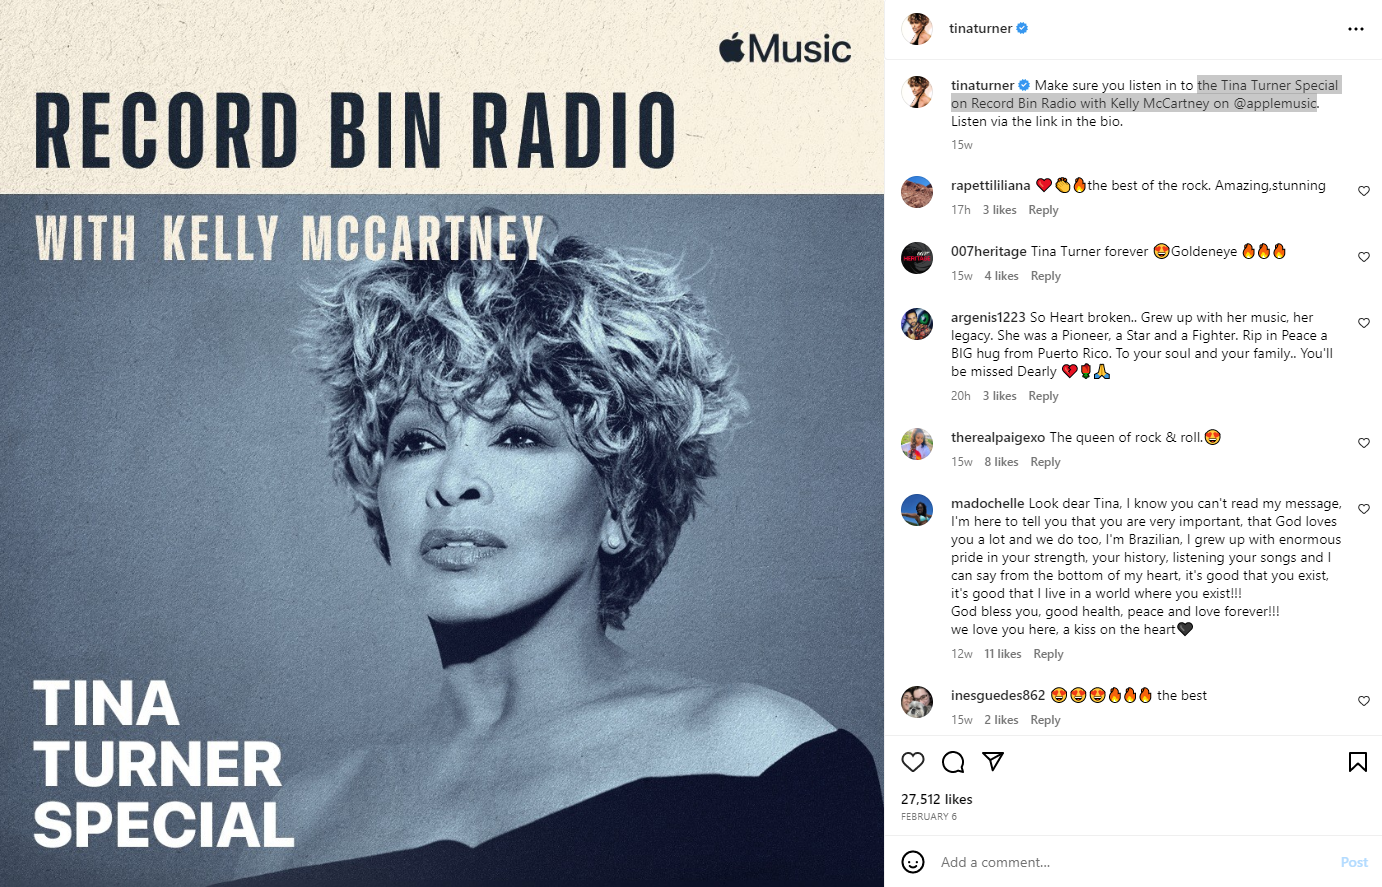 You are currently viewing The Iconic Tina Turner on Instagram: A Look at Her Life and Music